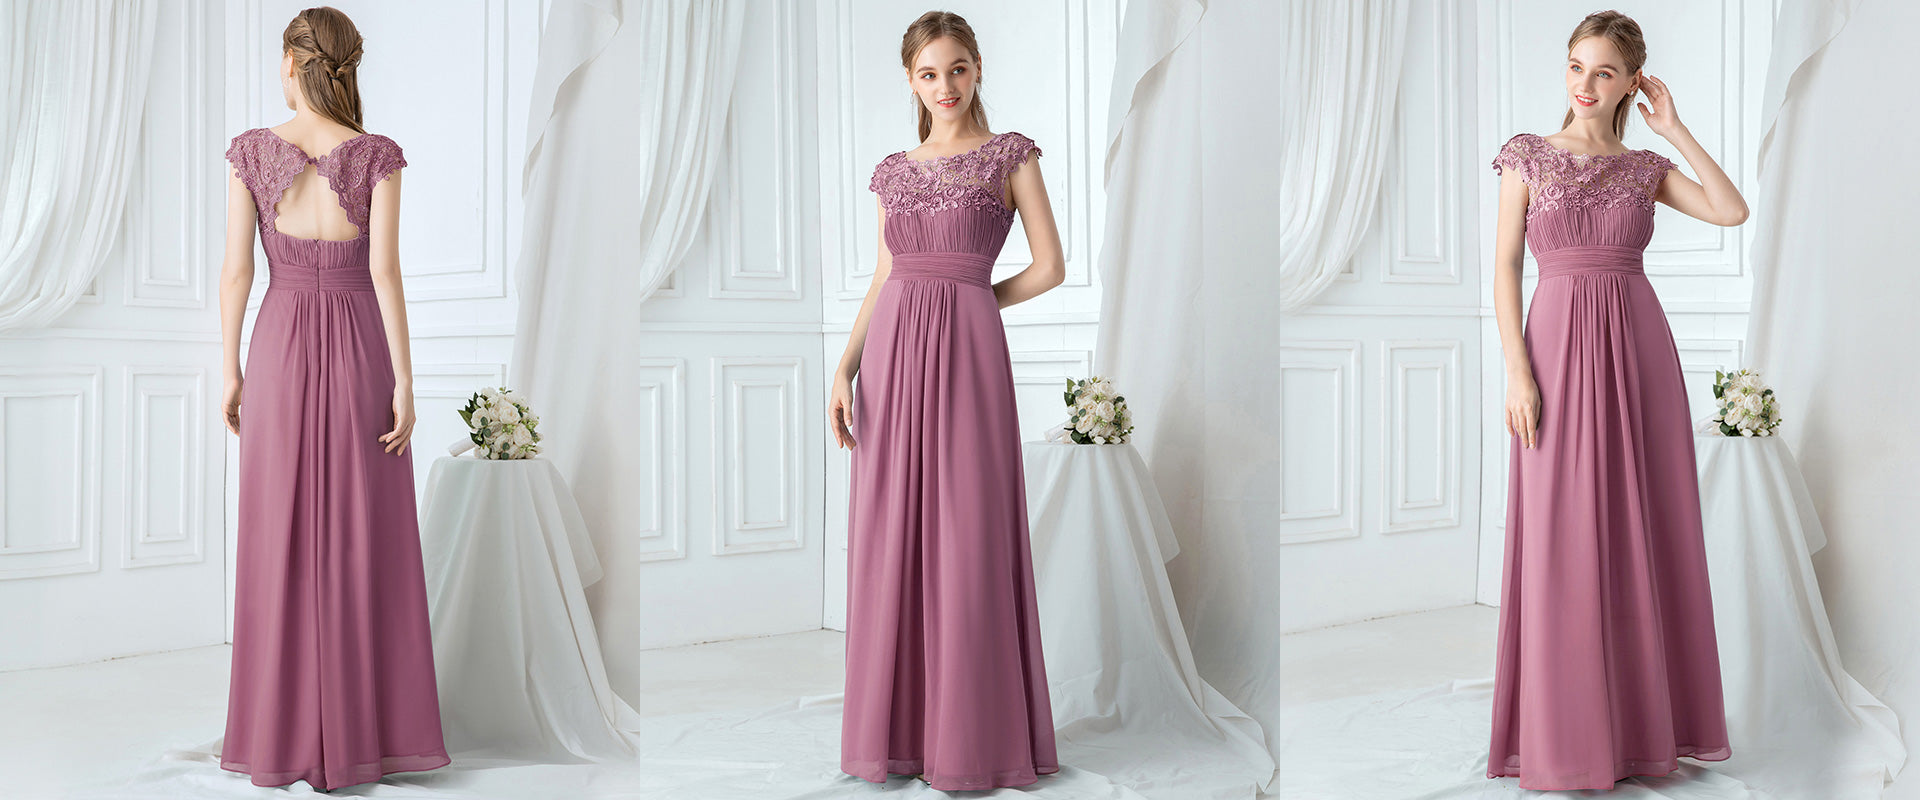 How To Buy Affordable Bridesmaid Dresses That Don't Look Cheap